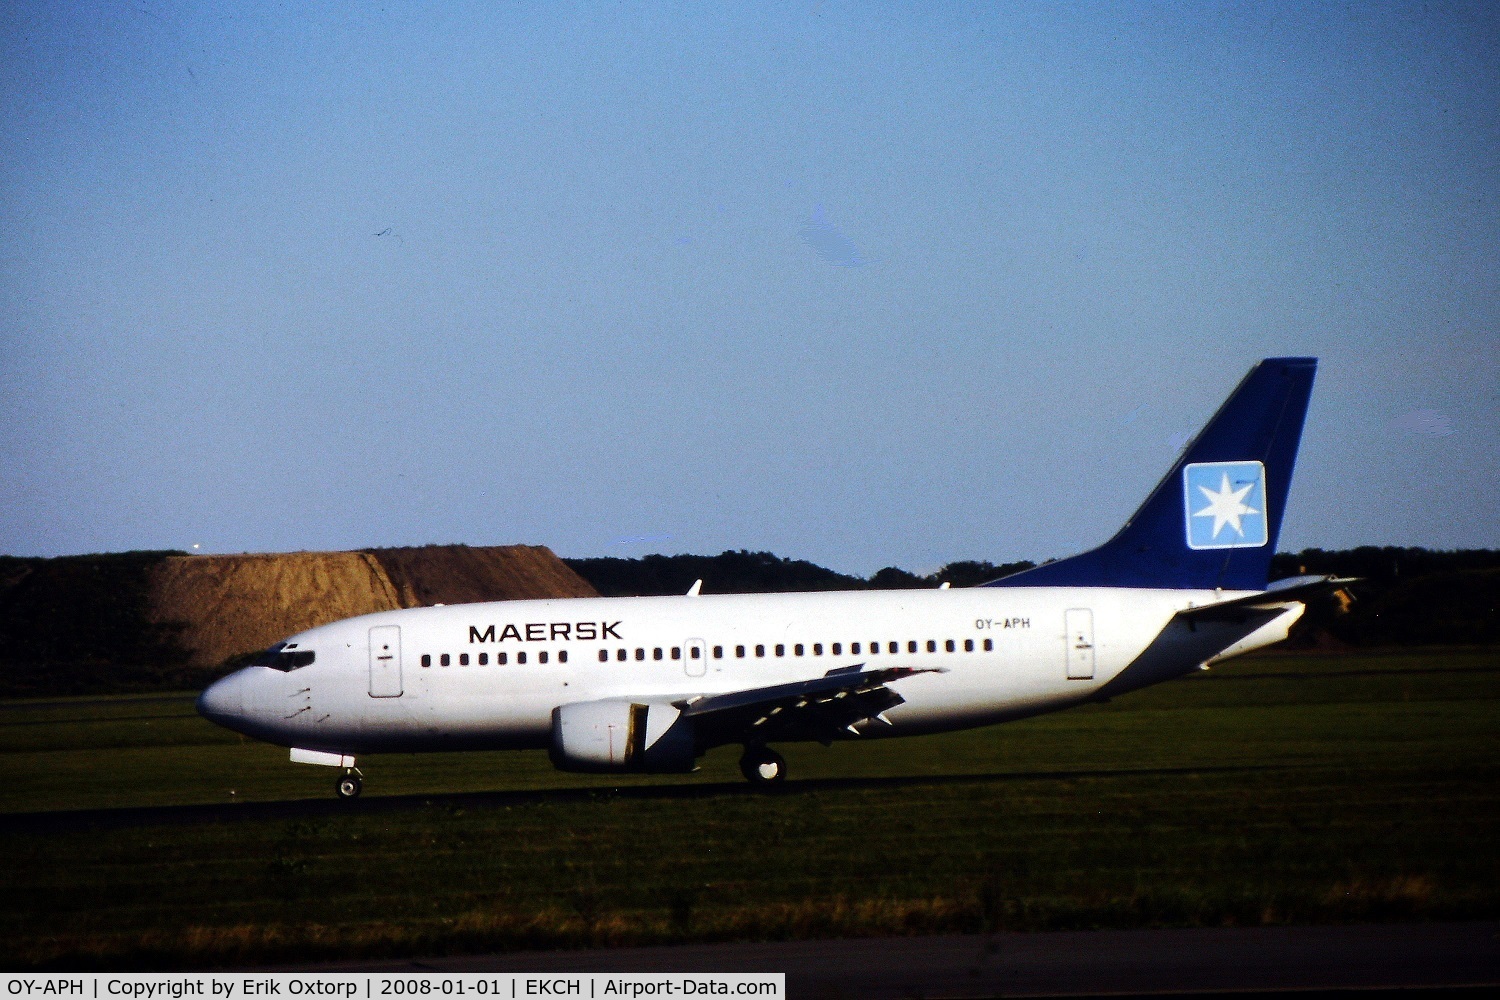 OY-APH, 1997 Boeing 737-5L9 C/N 28721, OY-APH in CPH, AUG04